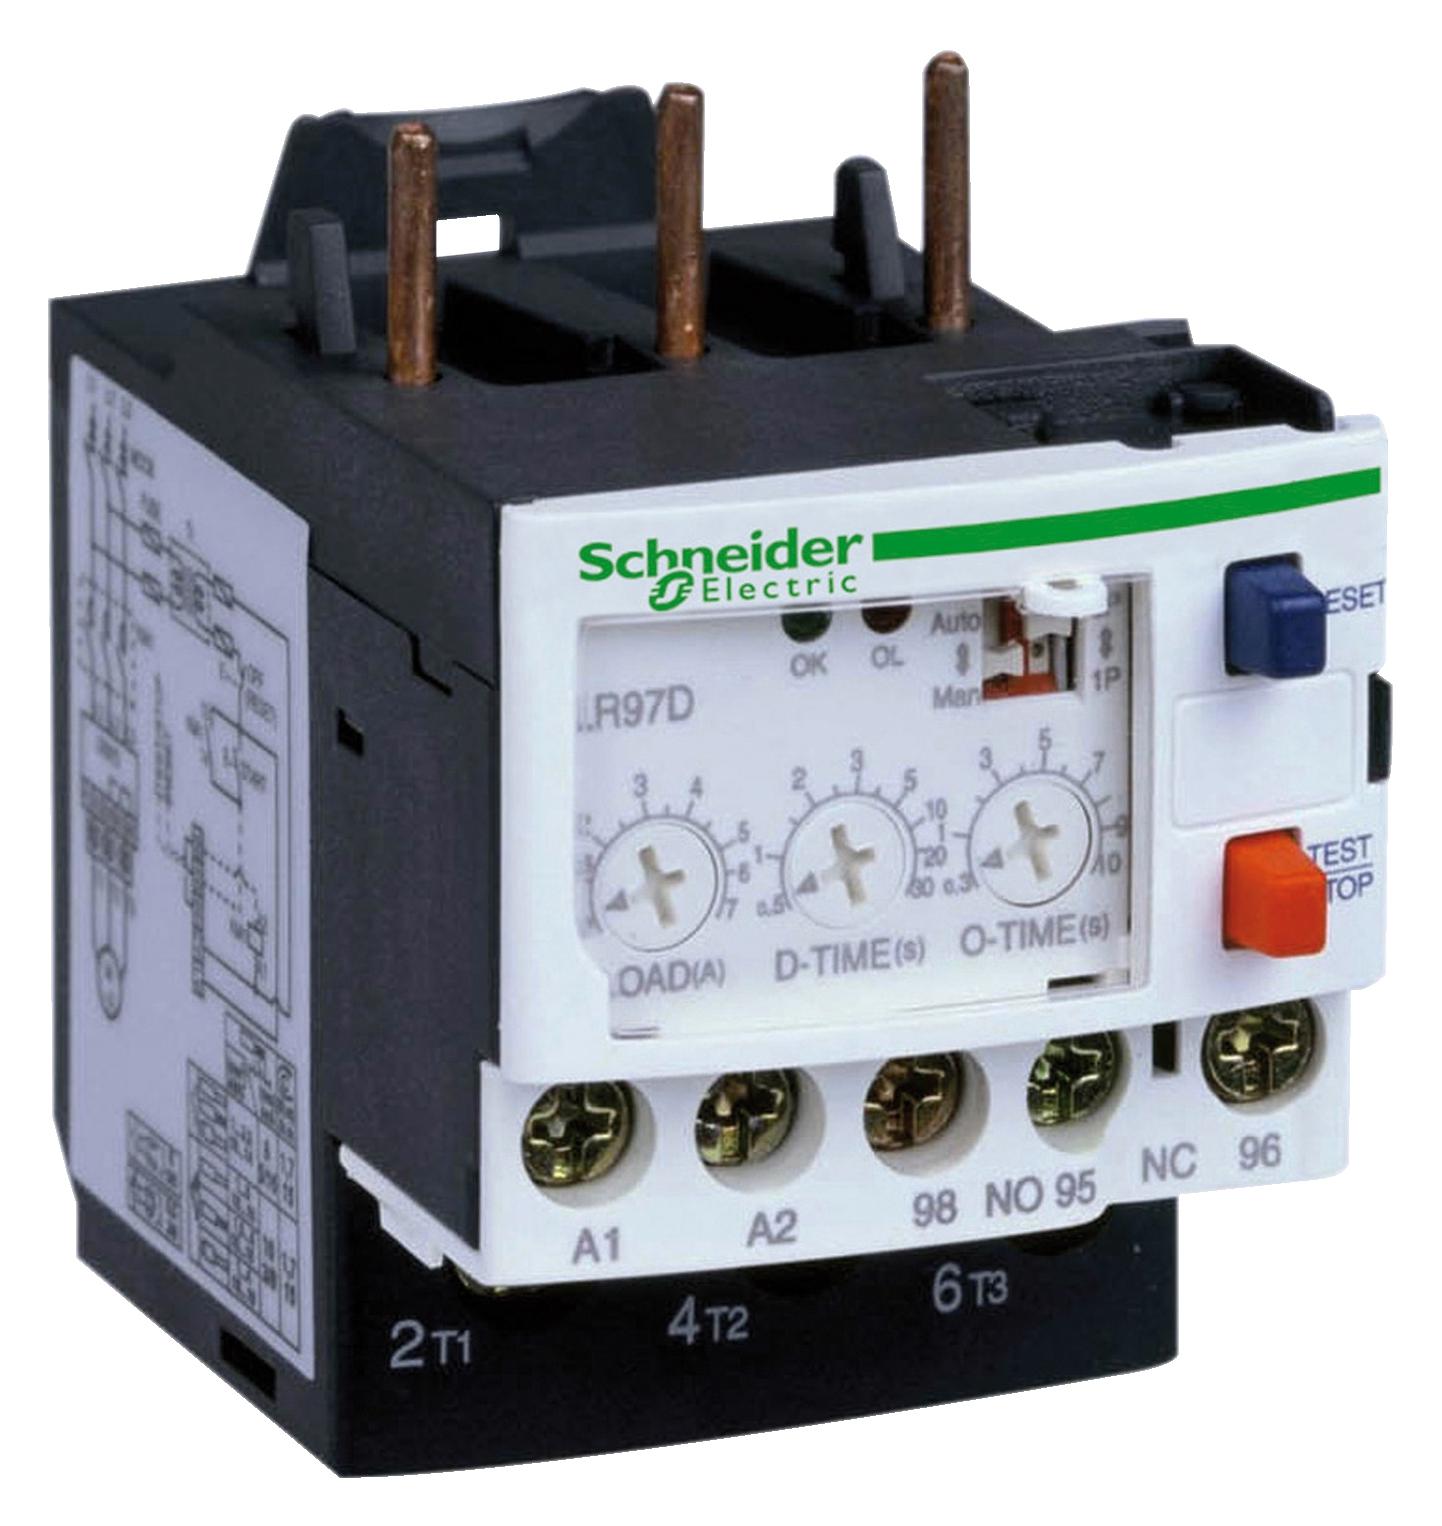 LR97D25F7 ELECTRONIC OVERLOAD CONTROLLER SCHNEIDER ELECTRIC